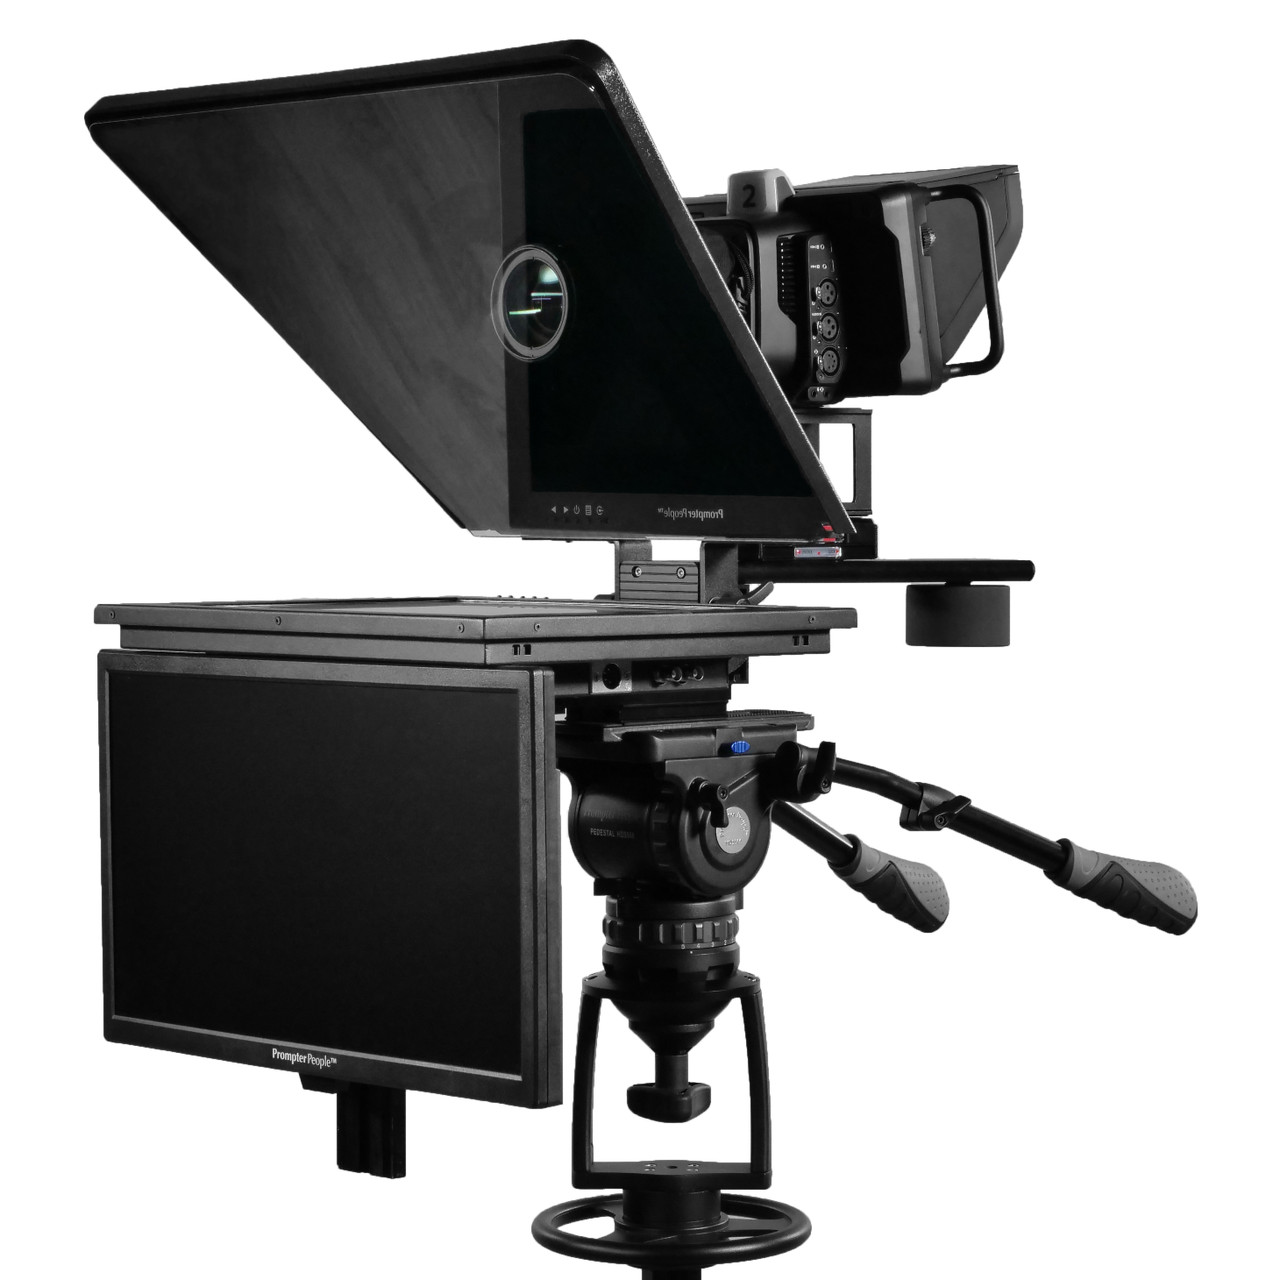 Flex Plus Talent Monitor Teleprompter | 17" 1000 NIT High Bright Prompting Monitor 3G-SDI | HDMI | VGA with 18.5" Color Accurate RGB IPS 3G-SDI Talent Monitor